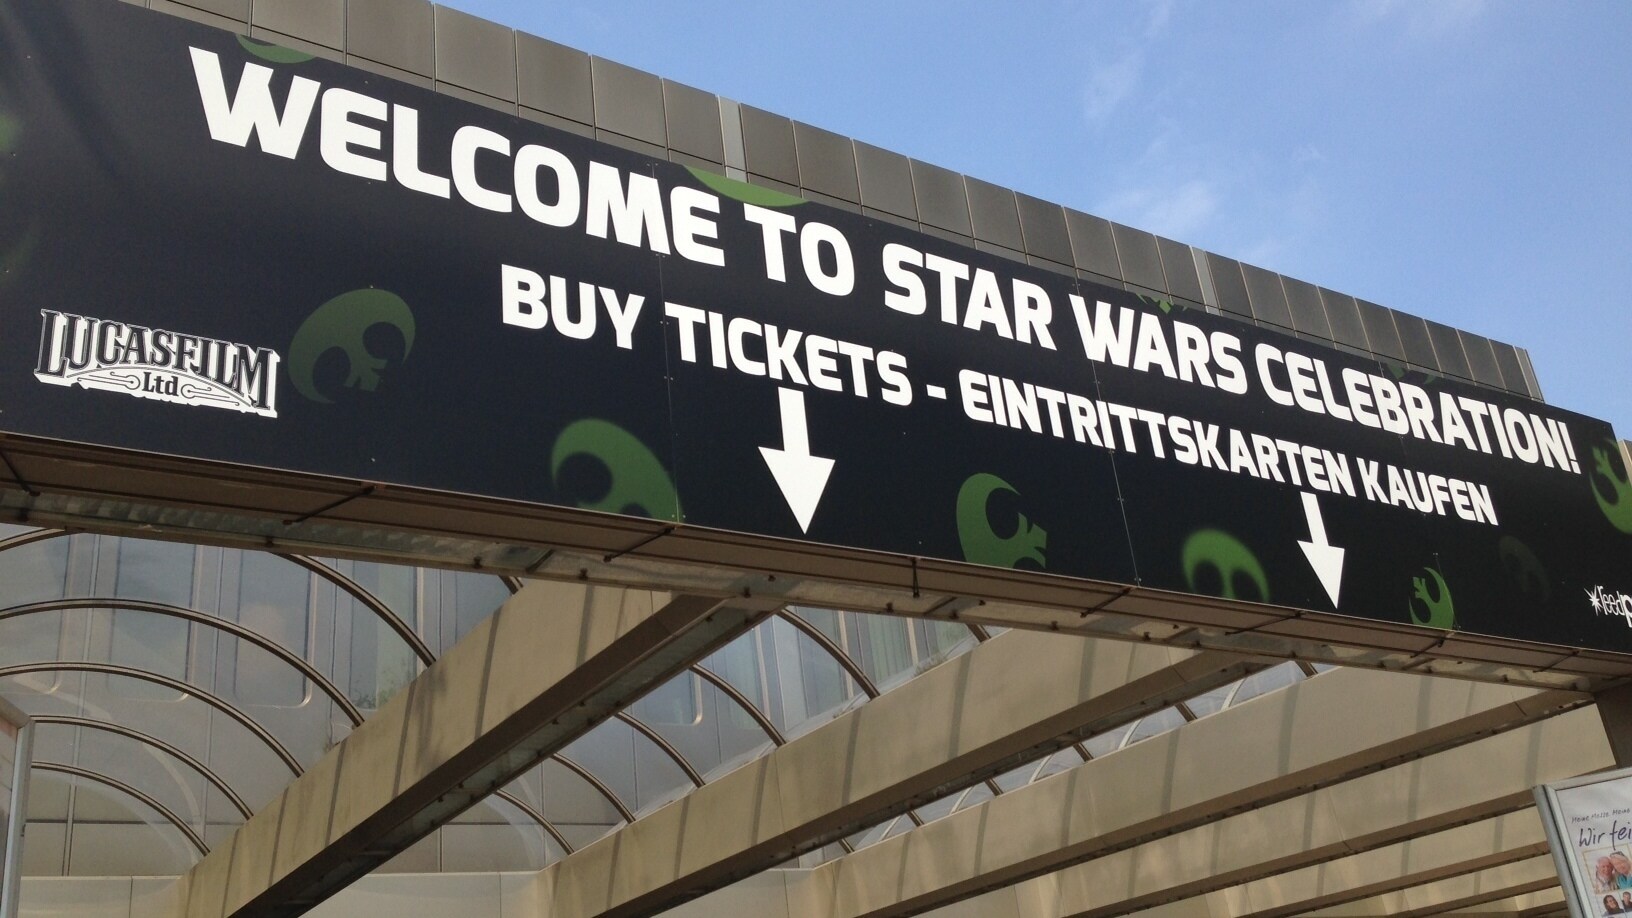 A sign at Star Wars Celebration Europe 2013 reads &quot;Welcome to Star Wars Celebration”. It says “Buy Tickets” in English and German.